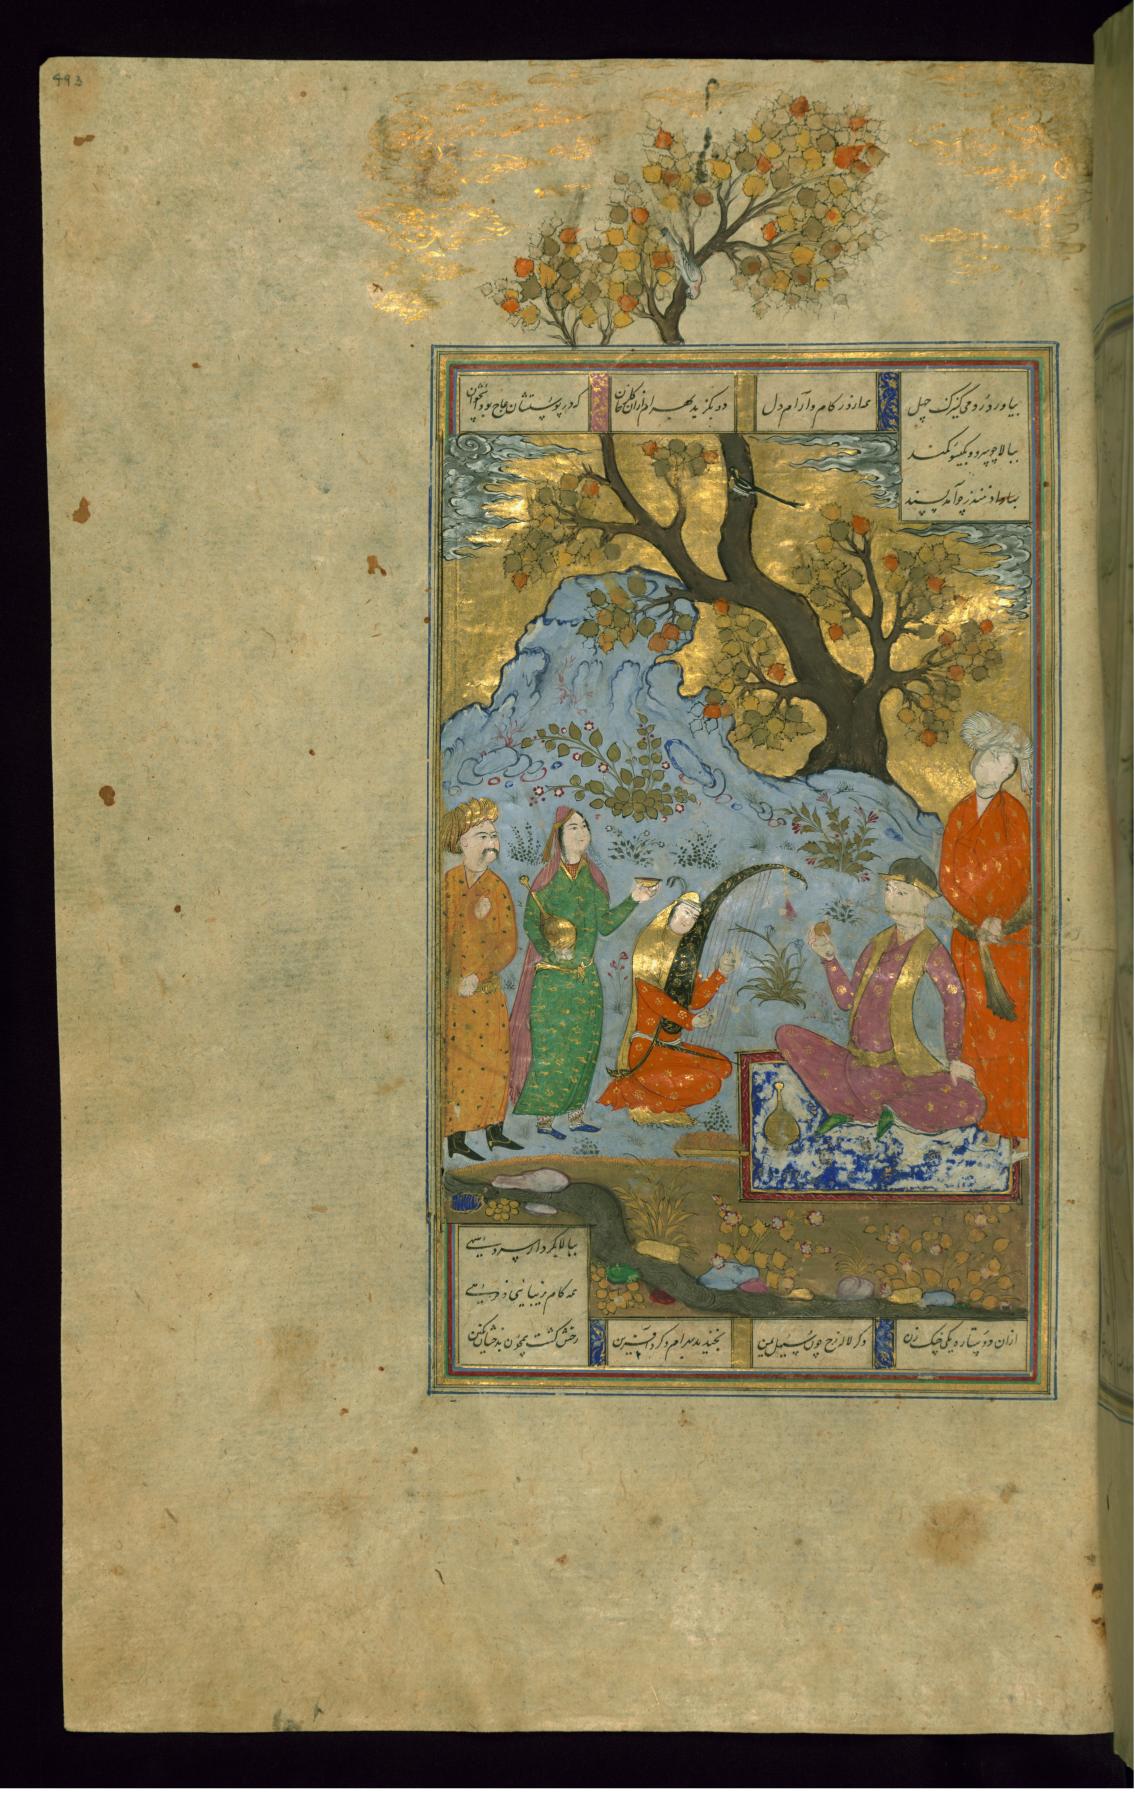 Munzir Introduces Bahram Gur To Two Maidens, One A Servant, The Other A Harpist